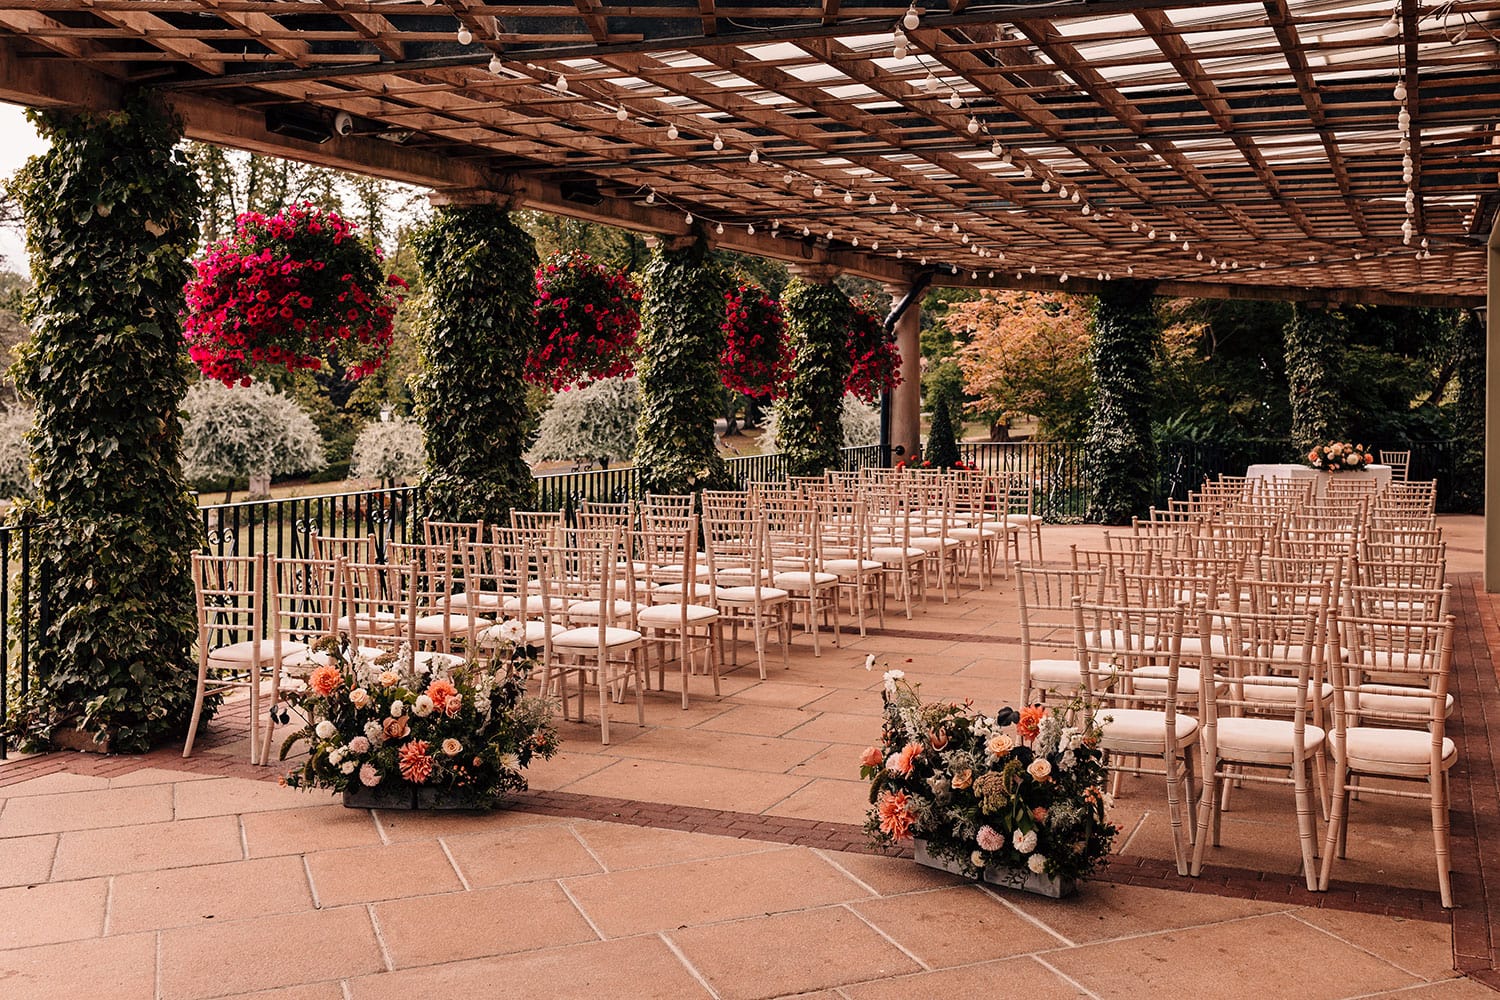 Flowers, greenery and hanging baskets surrounding an outdoor wedding venue in Harrogate